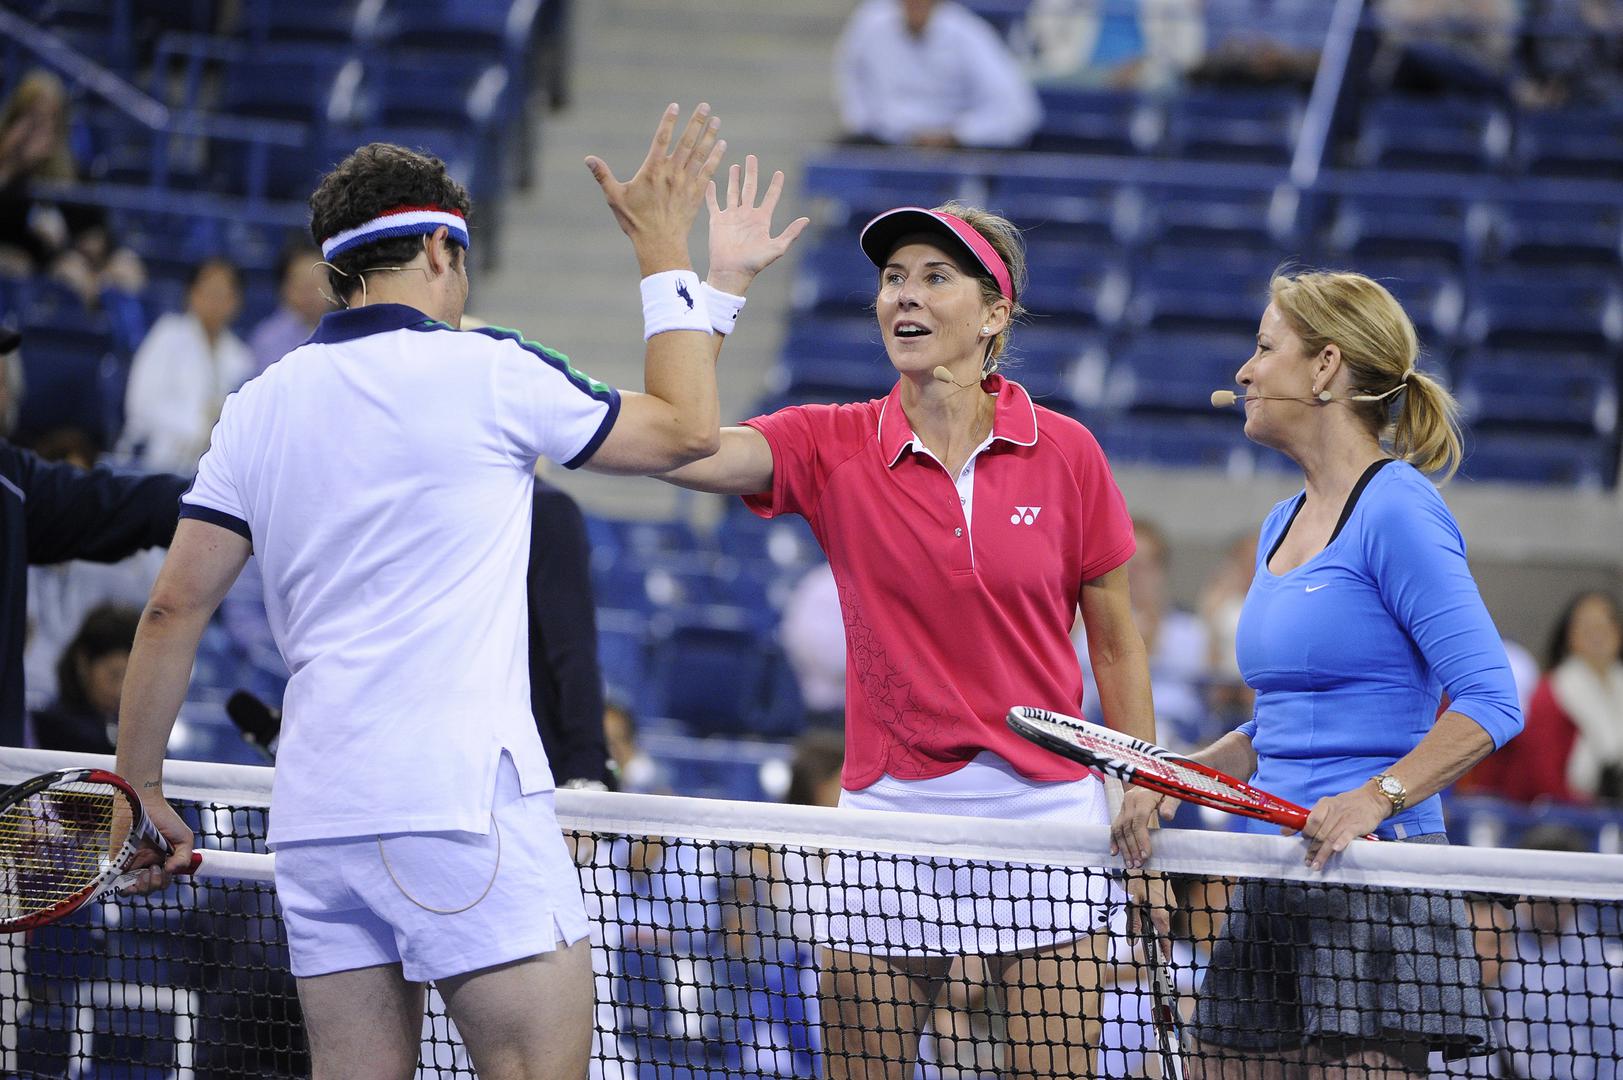 US Open - Exhibition Match - NYCFormer tennis players Chris Evert and Monica Seles play an exibition match v actors Jason Biggs and Rainn Wilson at the tennis US Open tournament held at the Arthur Ashe stadium in Flushing Meadows, New York City, NY, USA, on September 5, 2013. Photo by Corinne Dubreuil/ABACAPRESS. COMDubreuil Corinne/PIXSELL